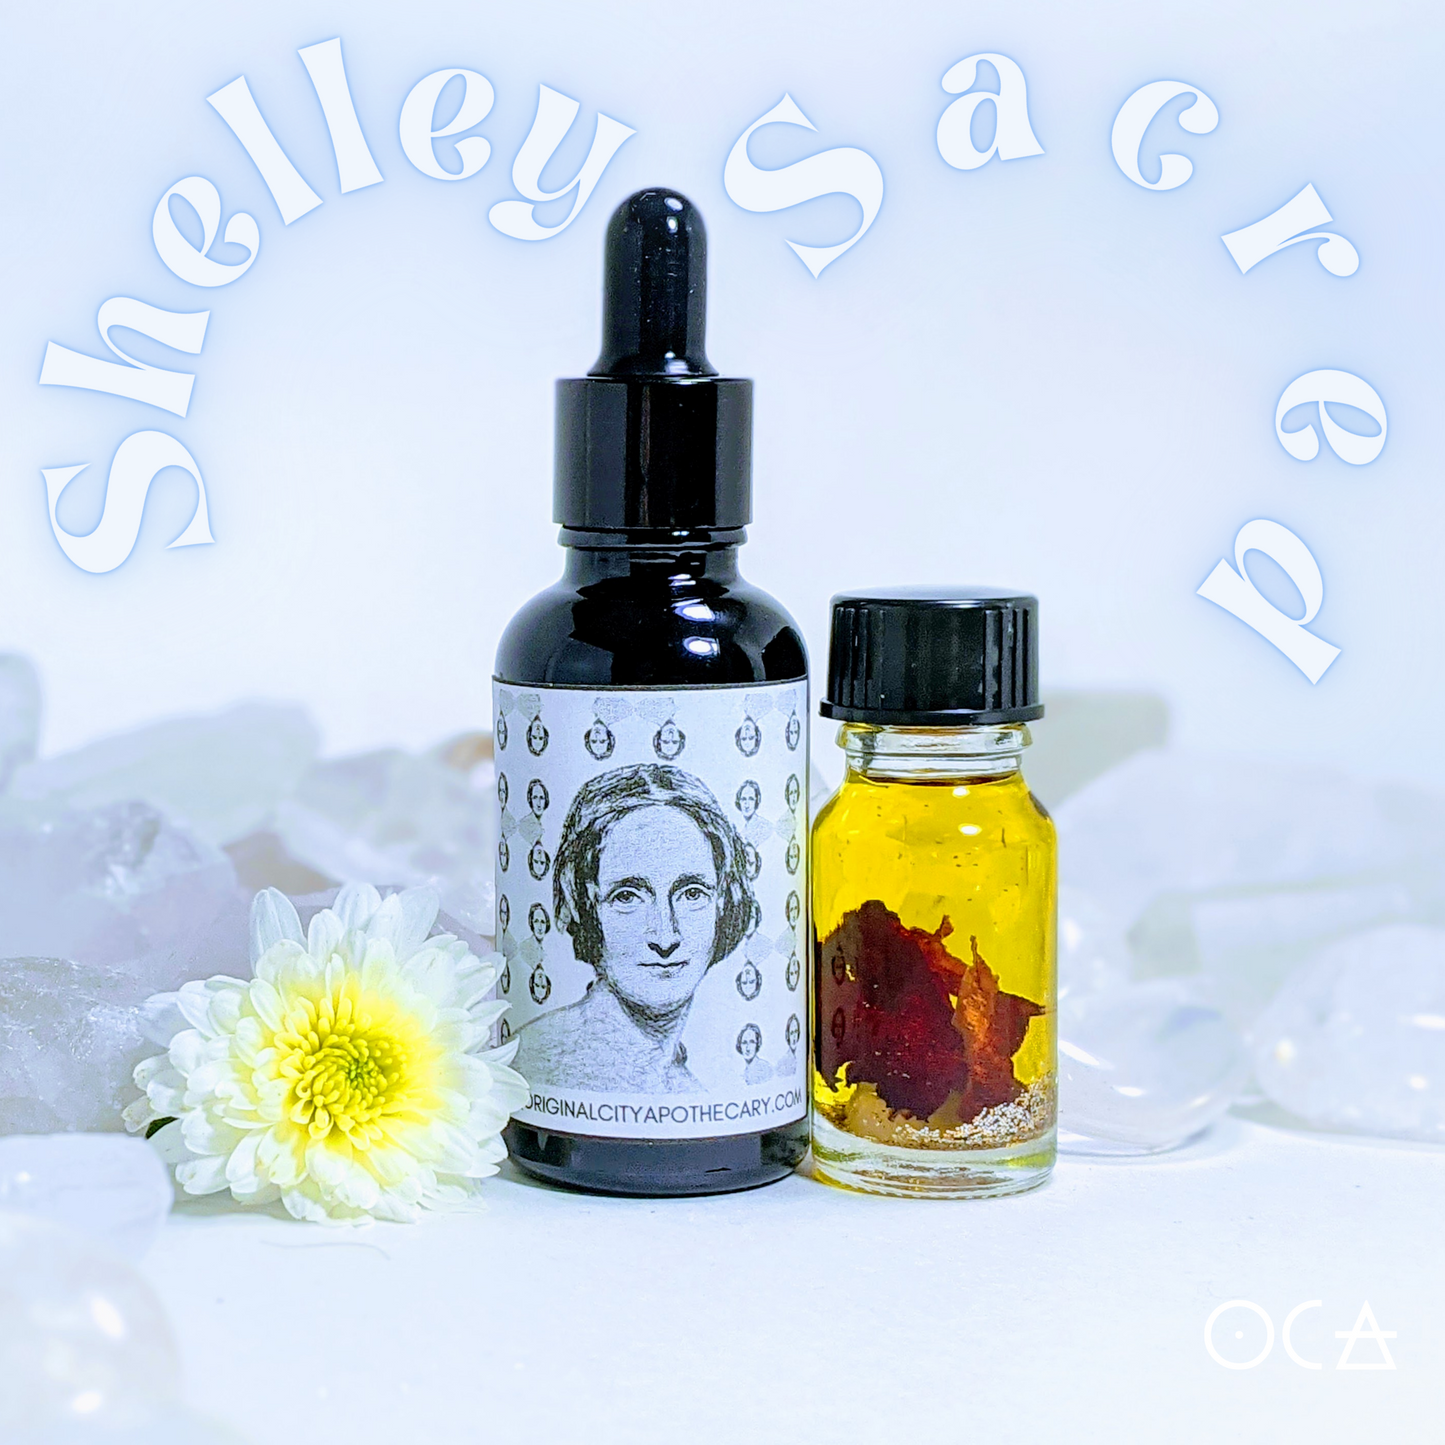 Shelley Sacred Oi/Perfume/Spray (Writer's Ritual Oil inspired by Mary Shelley)